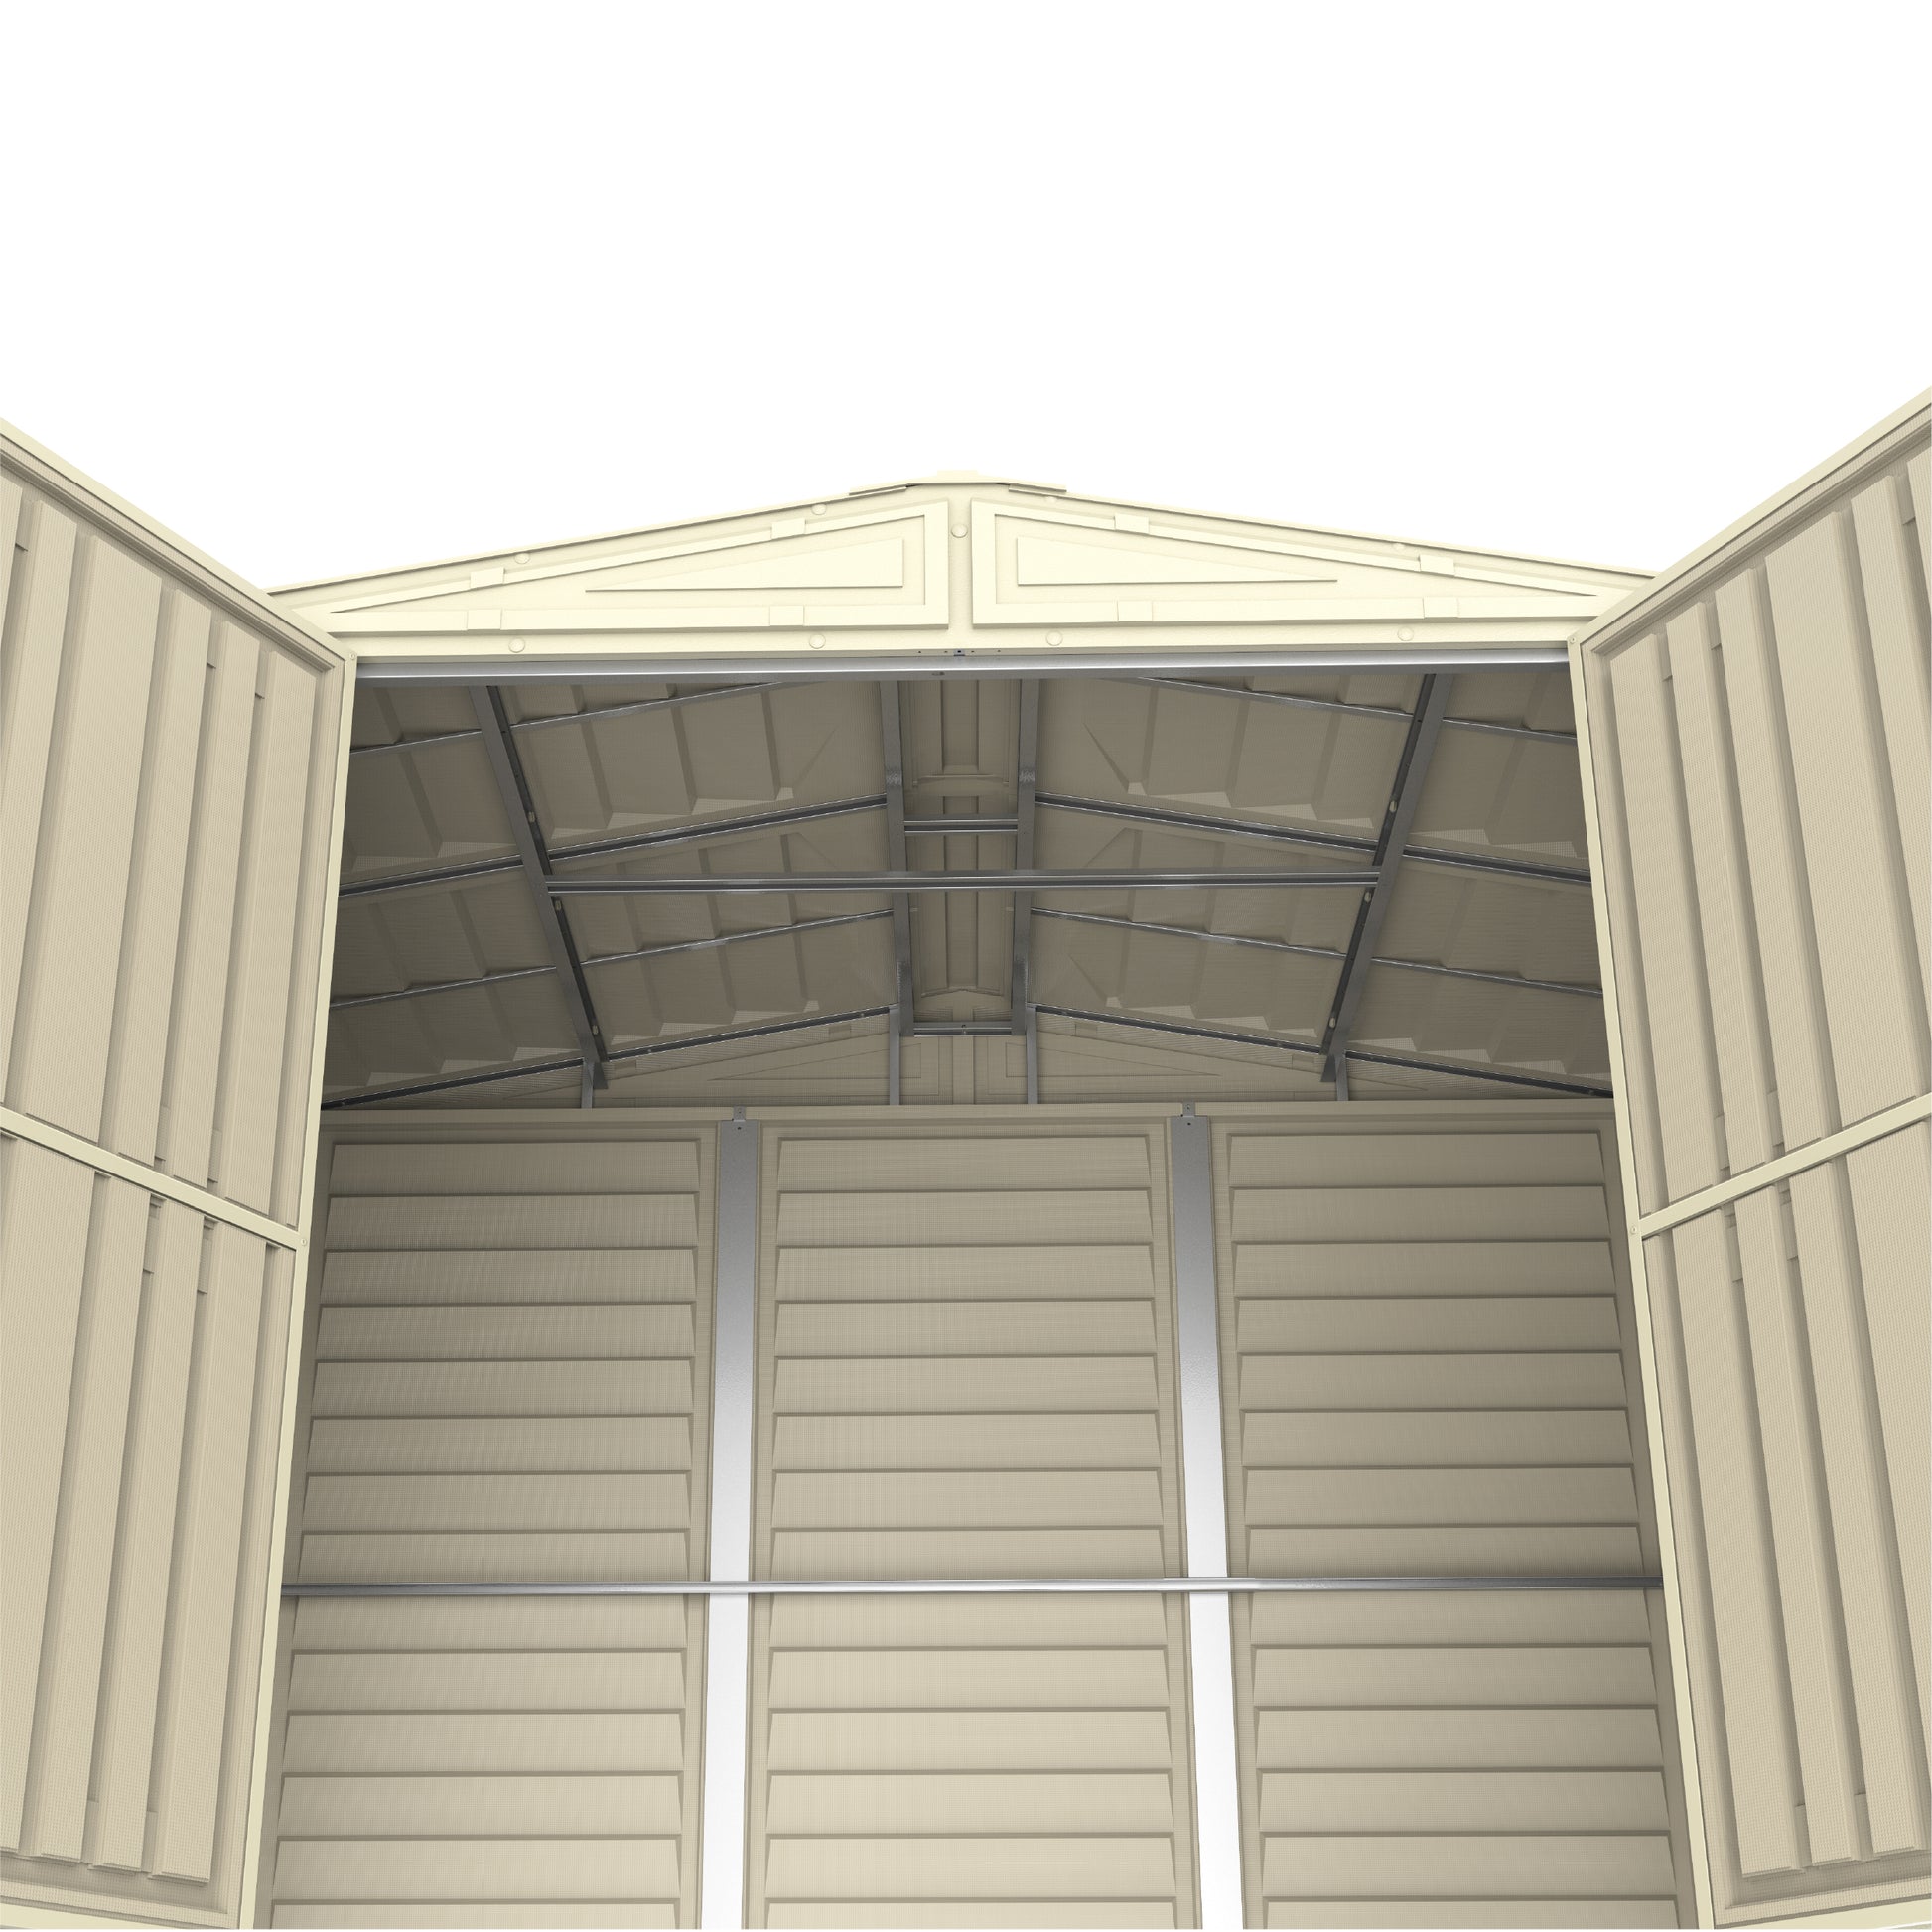 Outdoor Storage Shed 8x5ft- Cosmoplast Oman